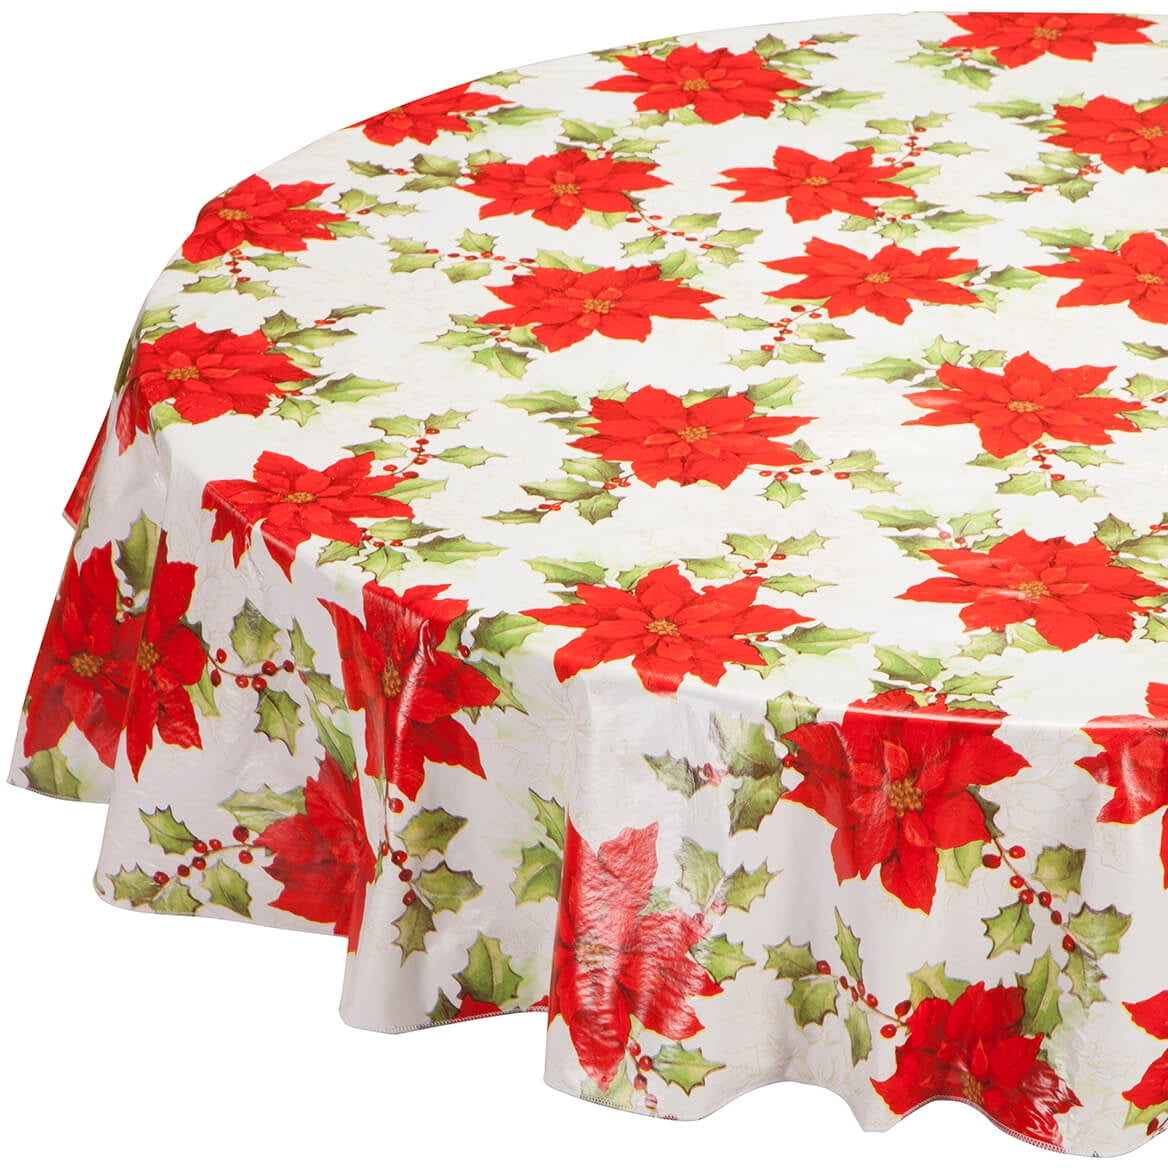 Size: 60 x 90 inch Q-Beans Rectangle Oblong Decorative Tablecloth Pineapples Washable and Reusable Table Cloth Cover for Indoor and Outdoor